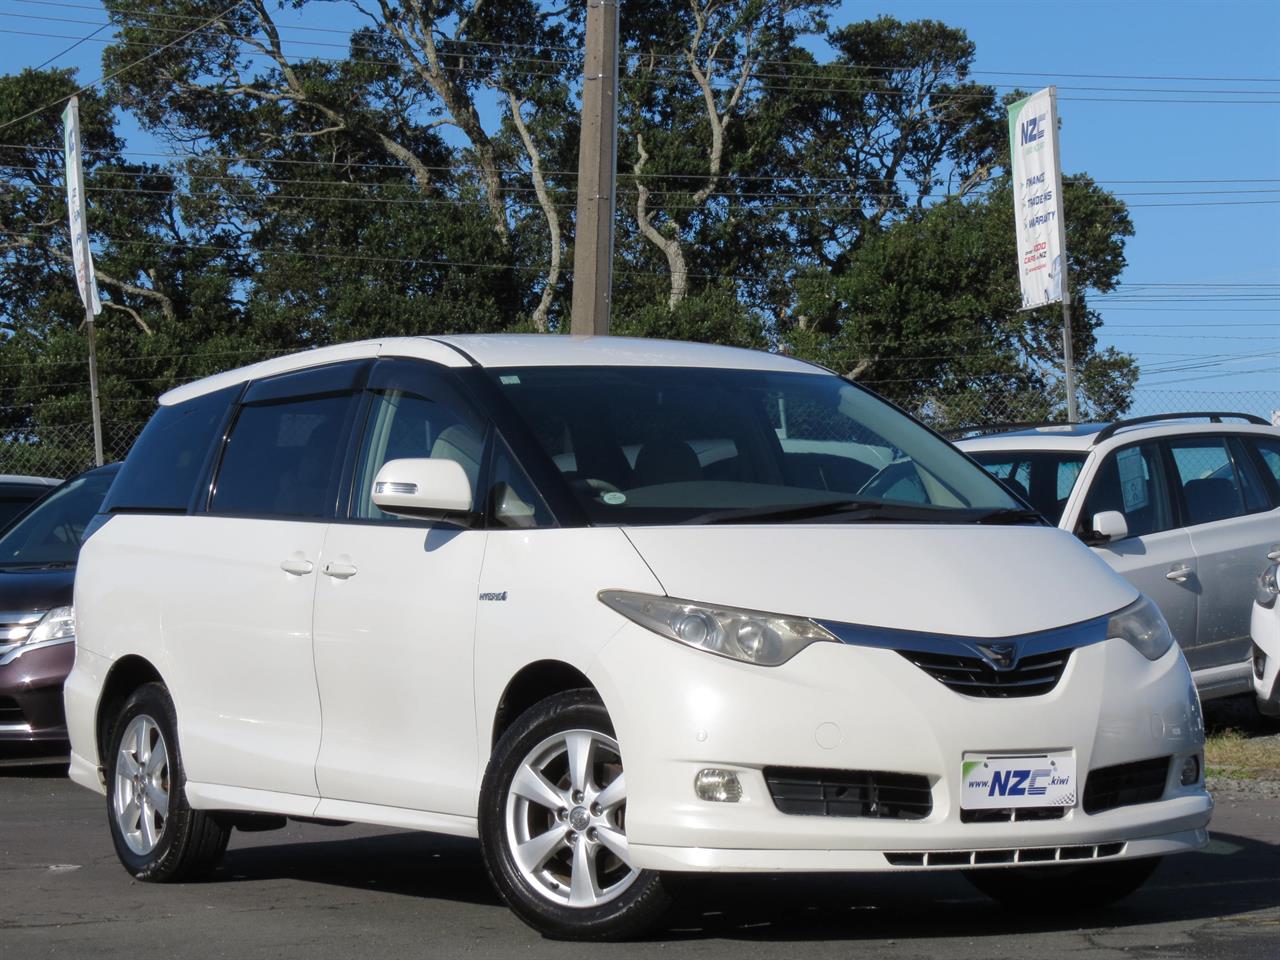 NZC 2007 Toyota Estima just arrived to Auckland